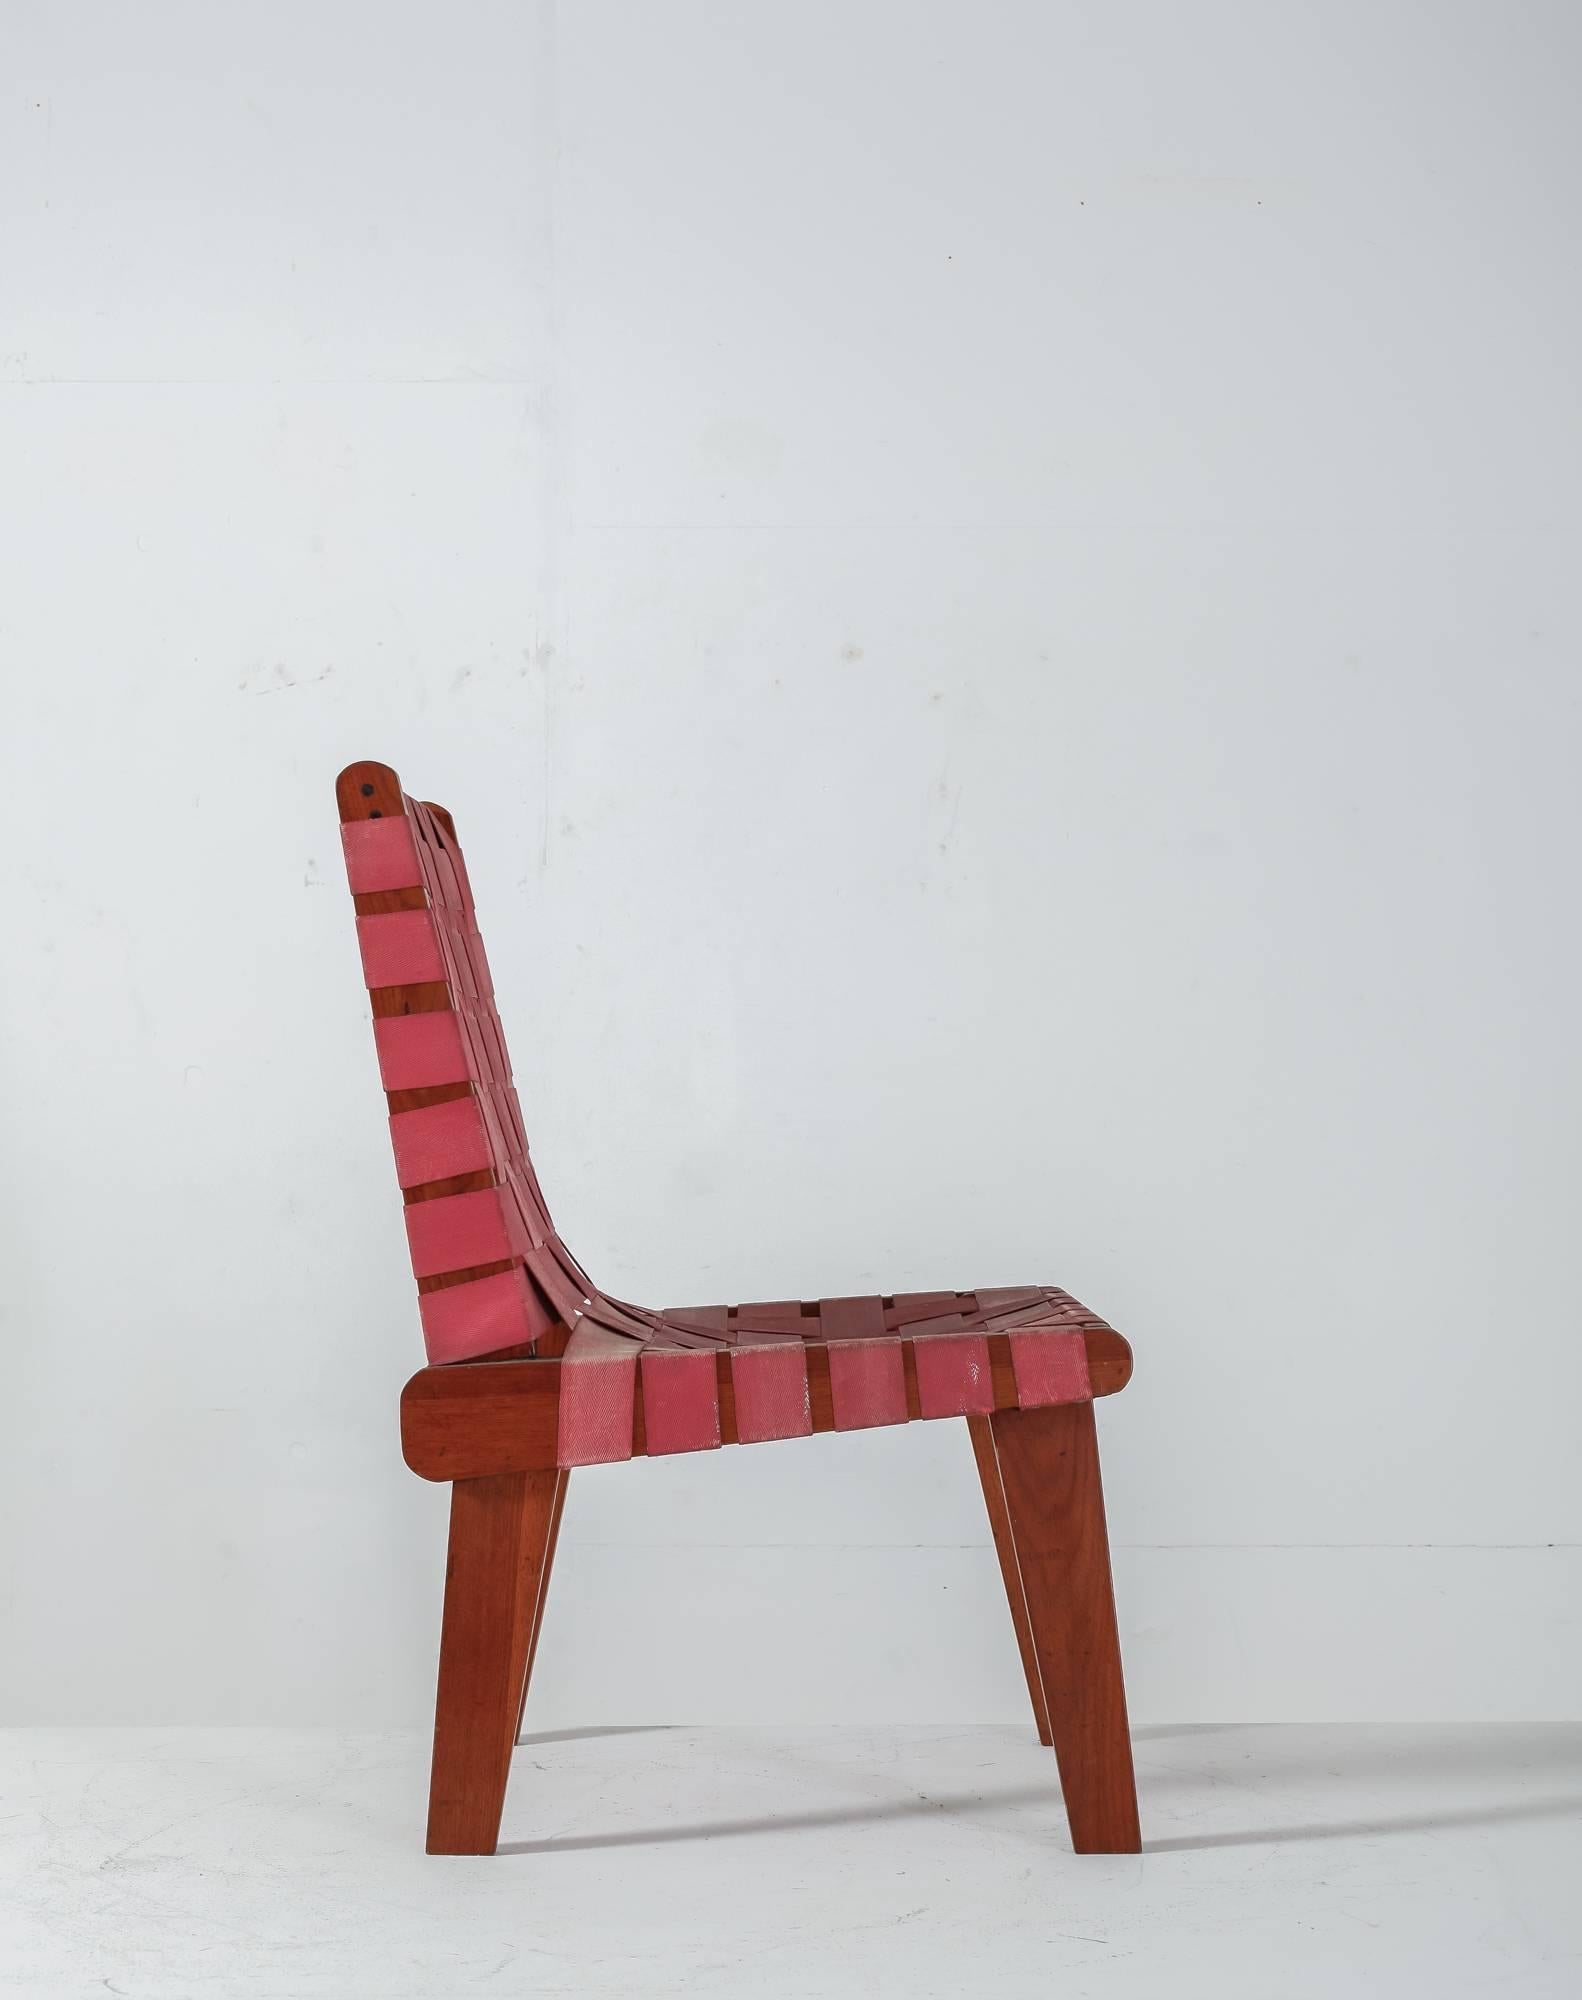 American Minimal Red Webbed Chair, USA, 1950s For Sale